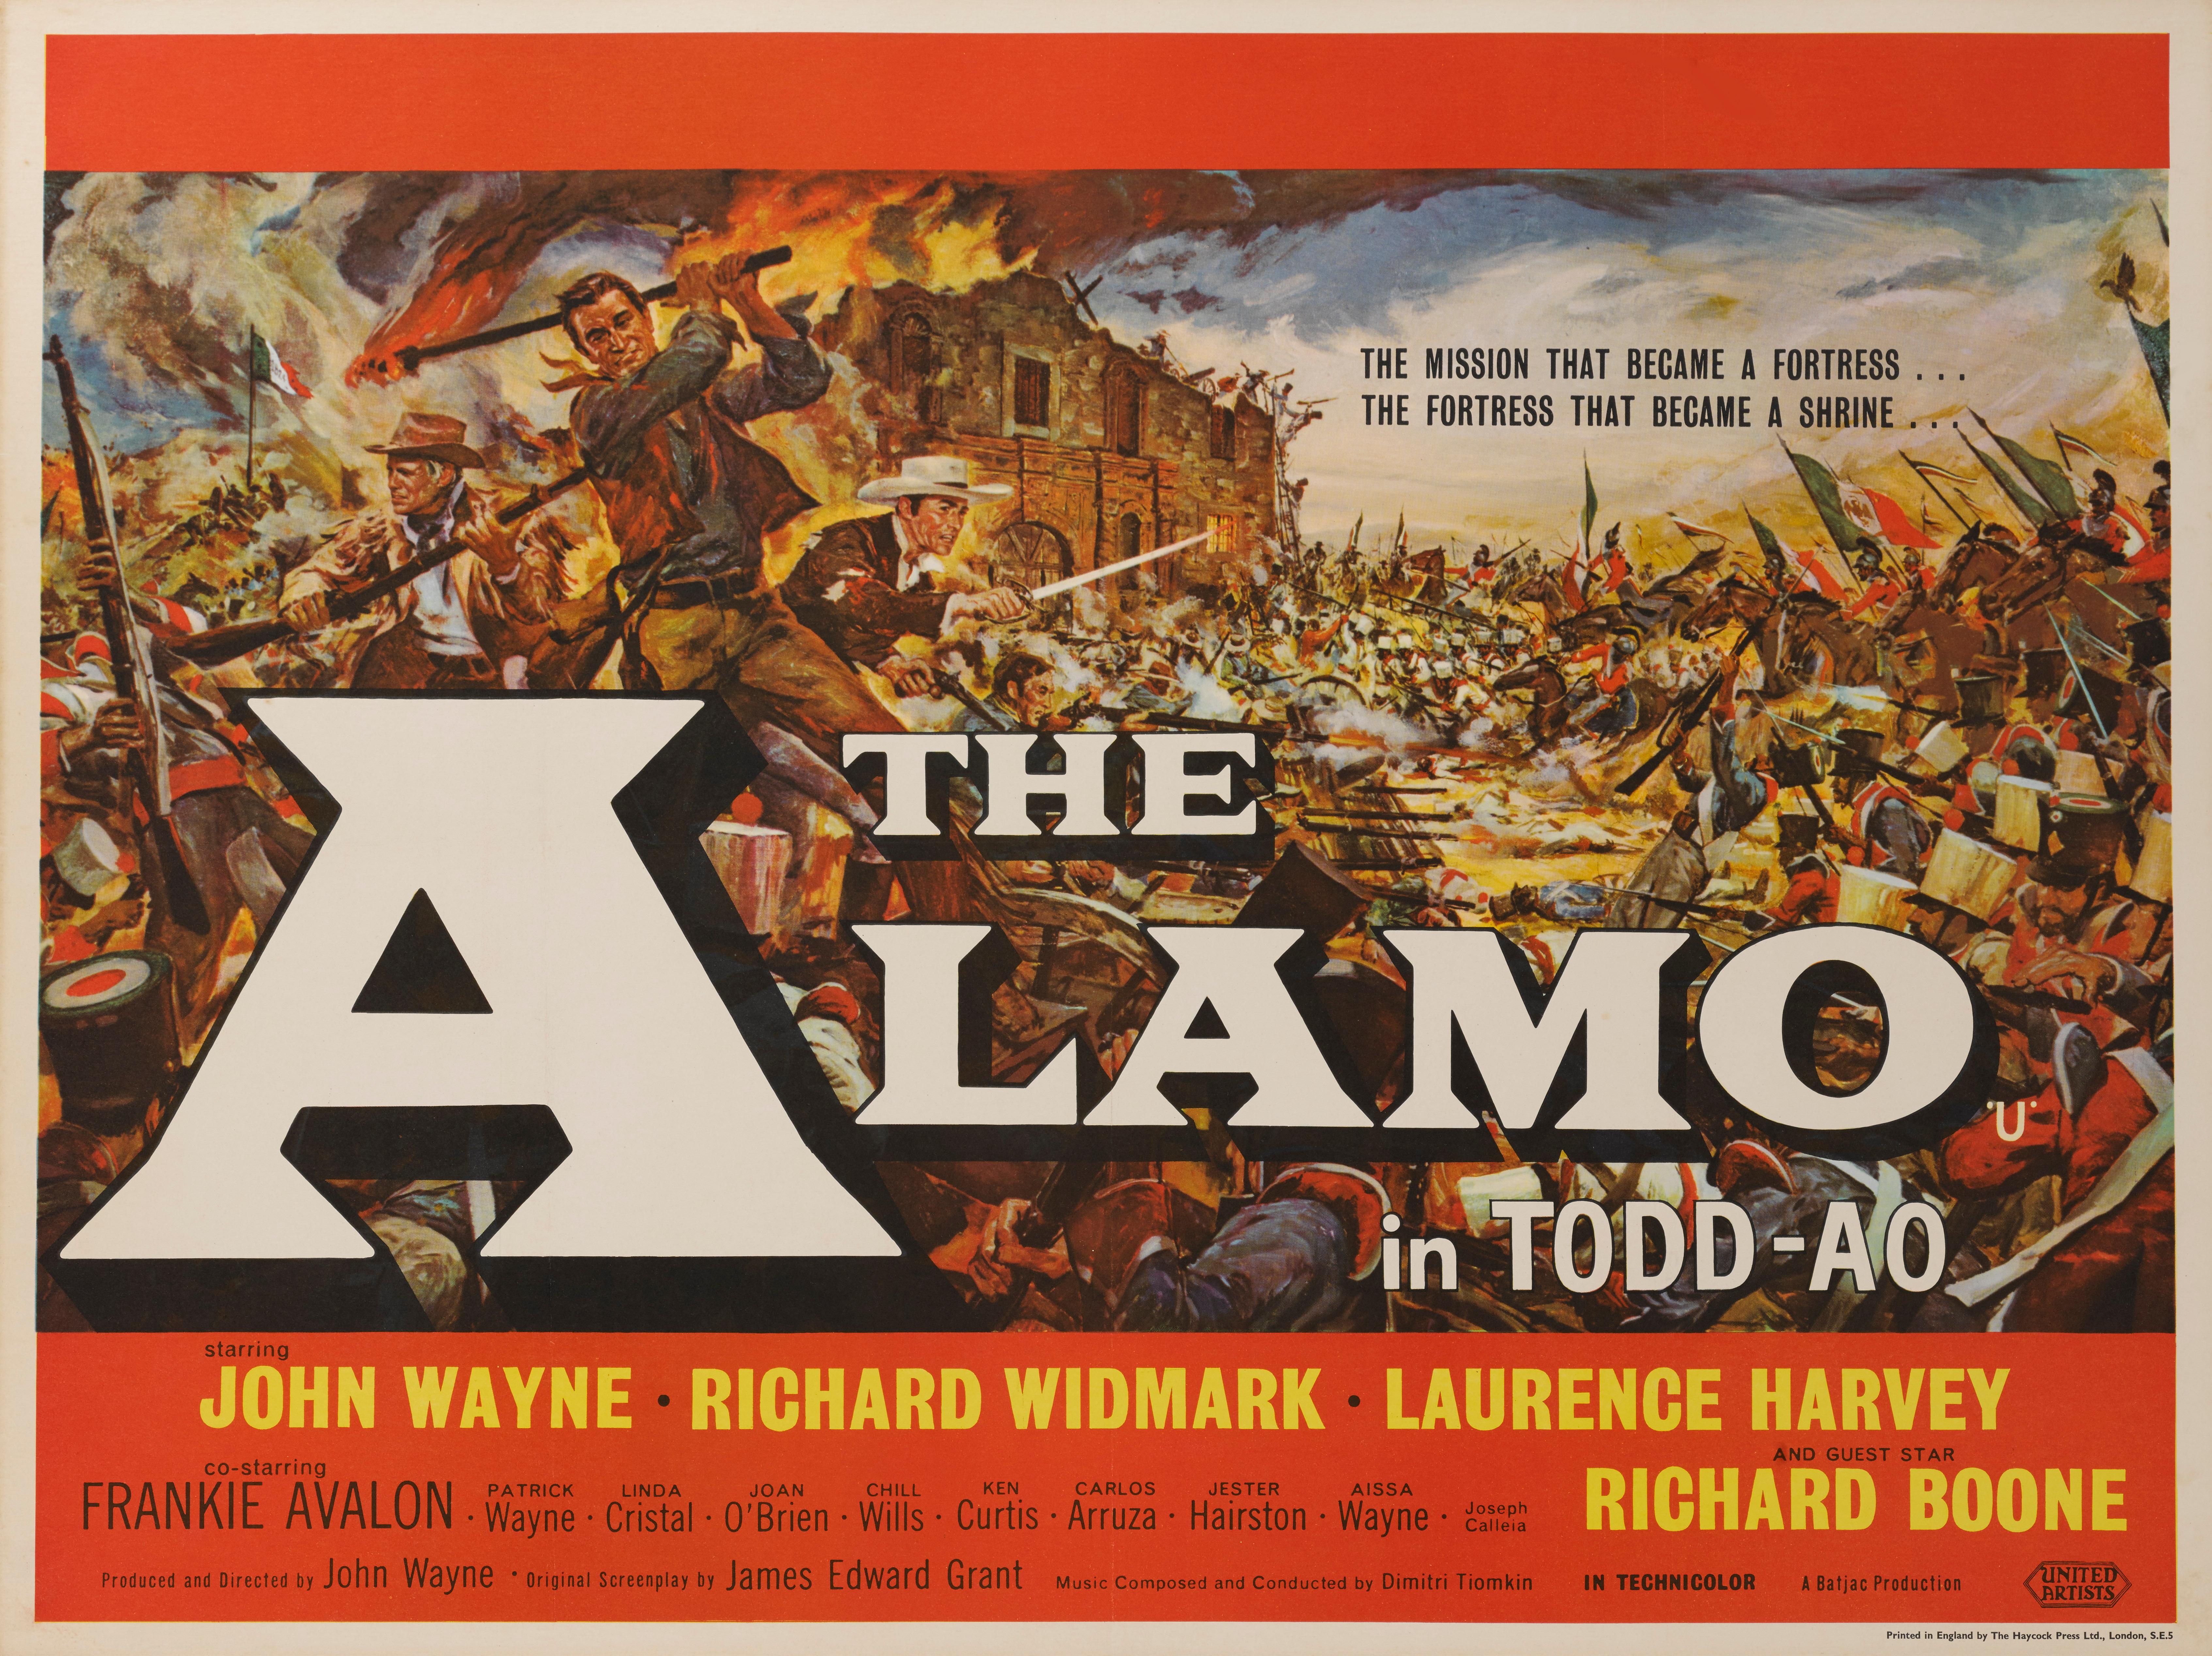 Original British film poster for the 1960 Western The Alamo.
The film was directed John Wayne and starred John Wayne, Richard Widmark, Laurence Harvey. This poster is conservation line backed and would be shipped rolled in a strong tube.